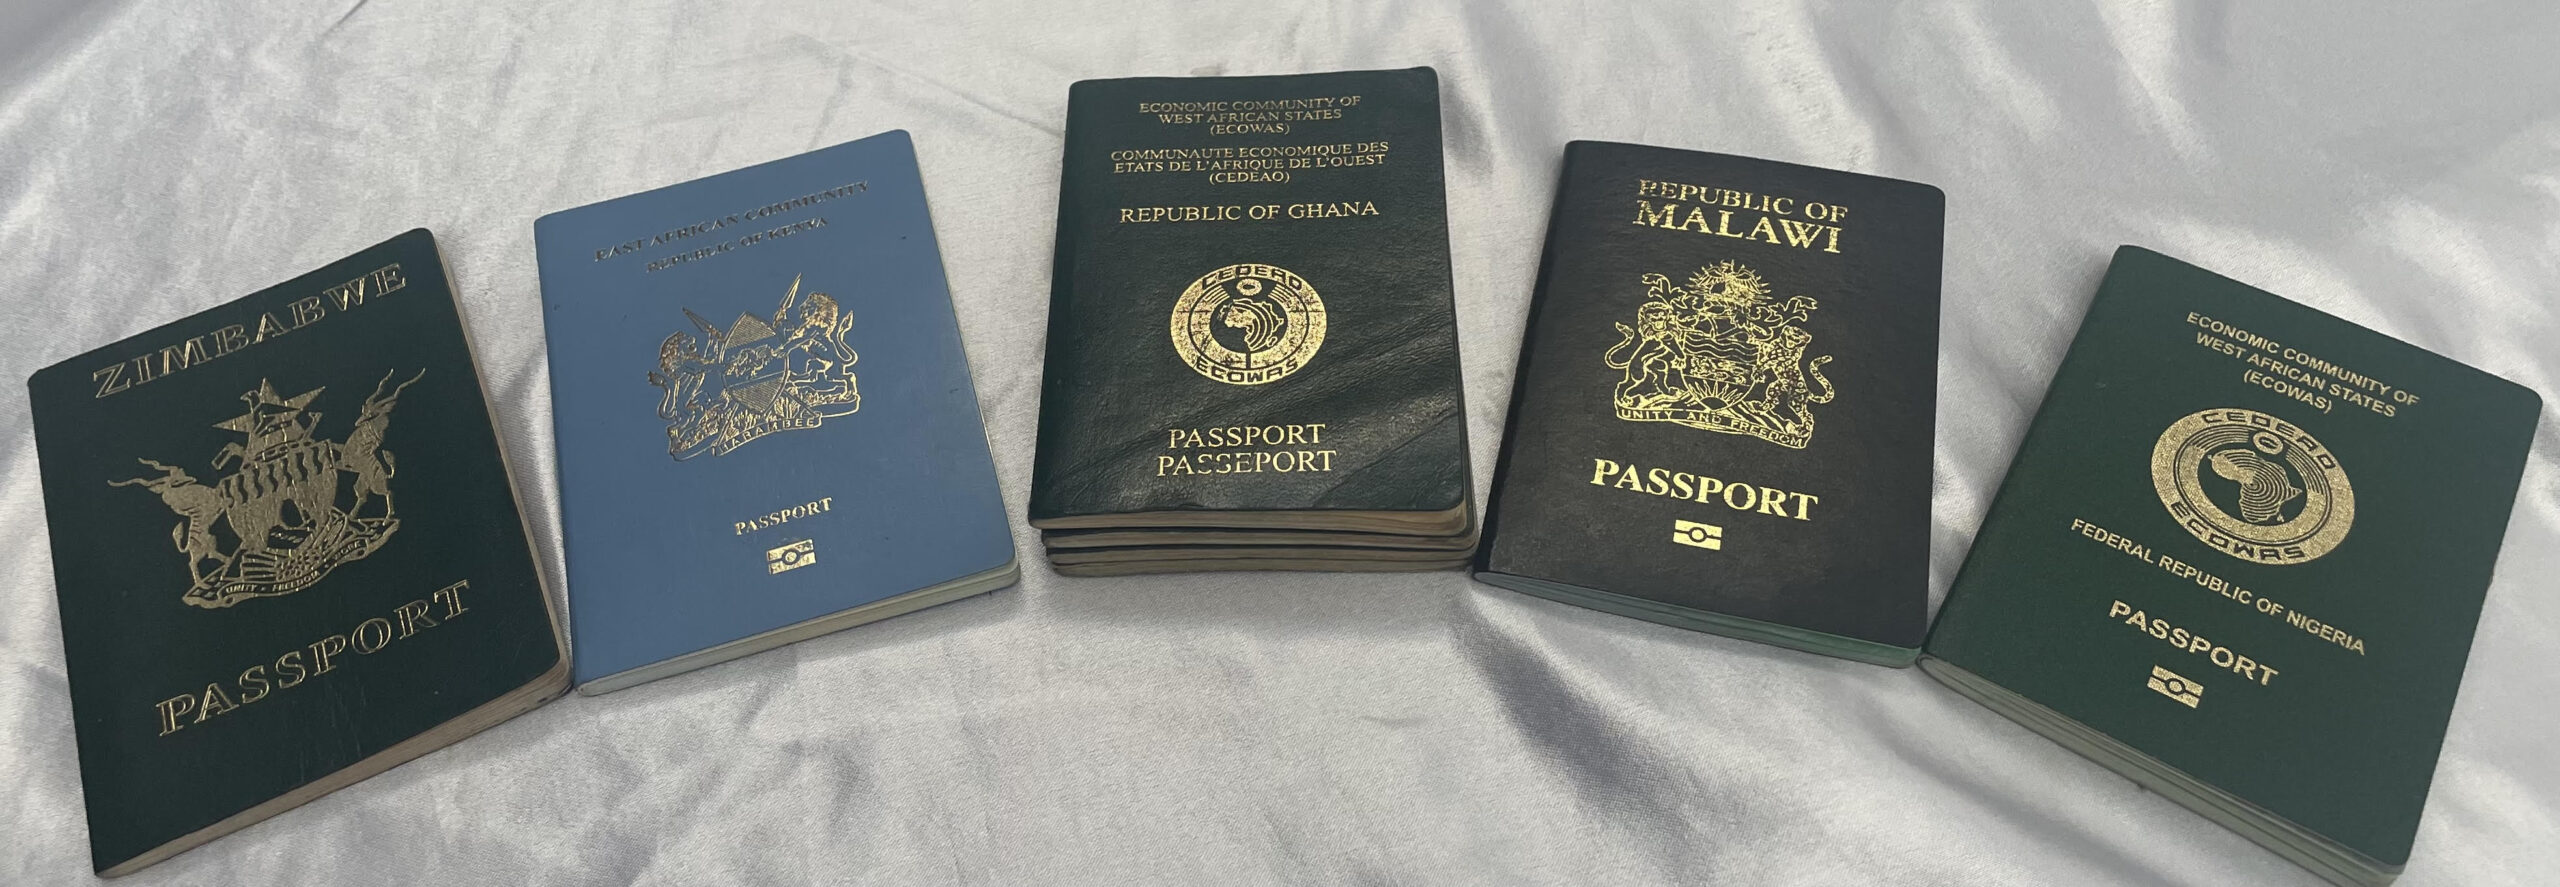 Minister proposes Ghana passport fees increased from GH¢100 to GH¢644 